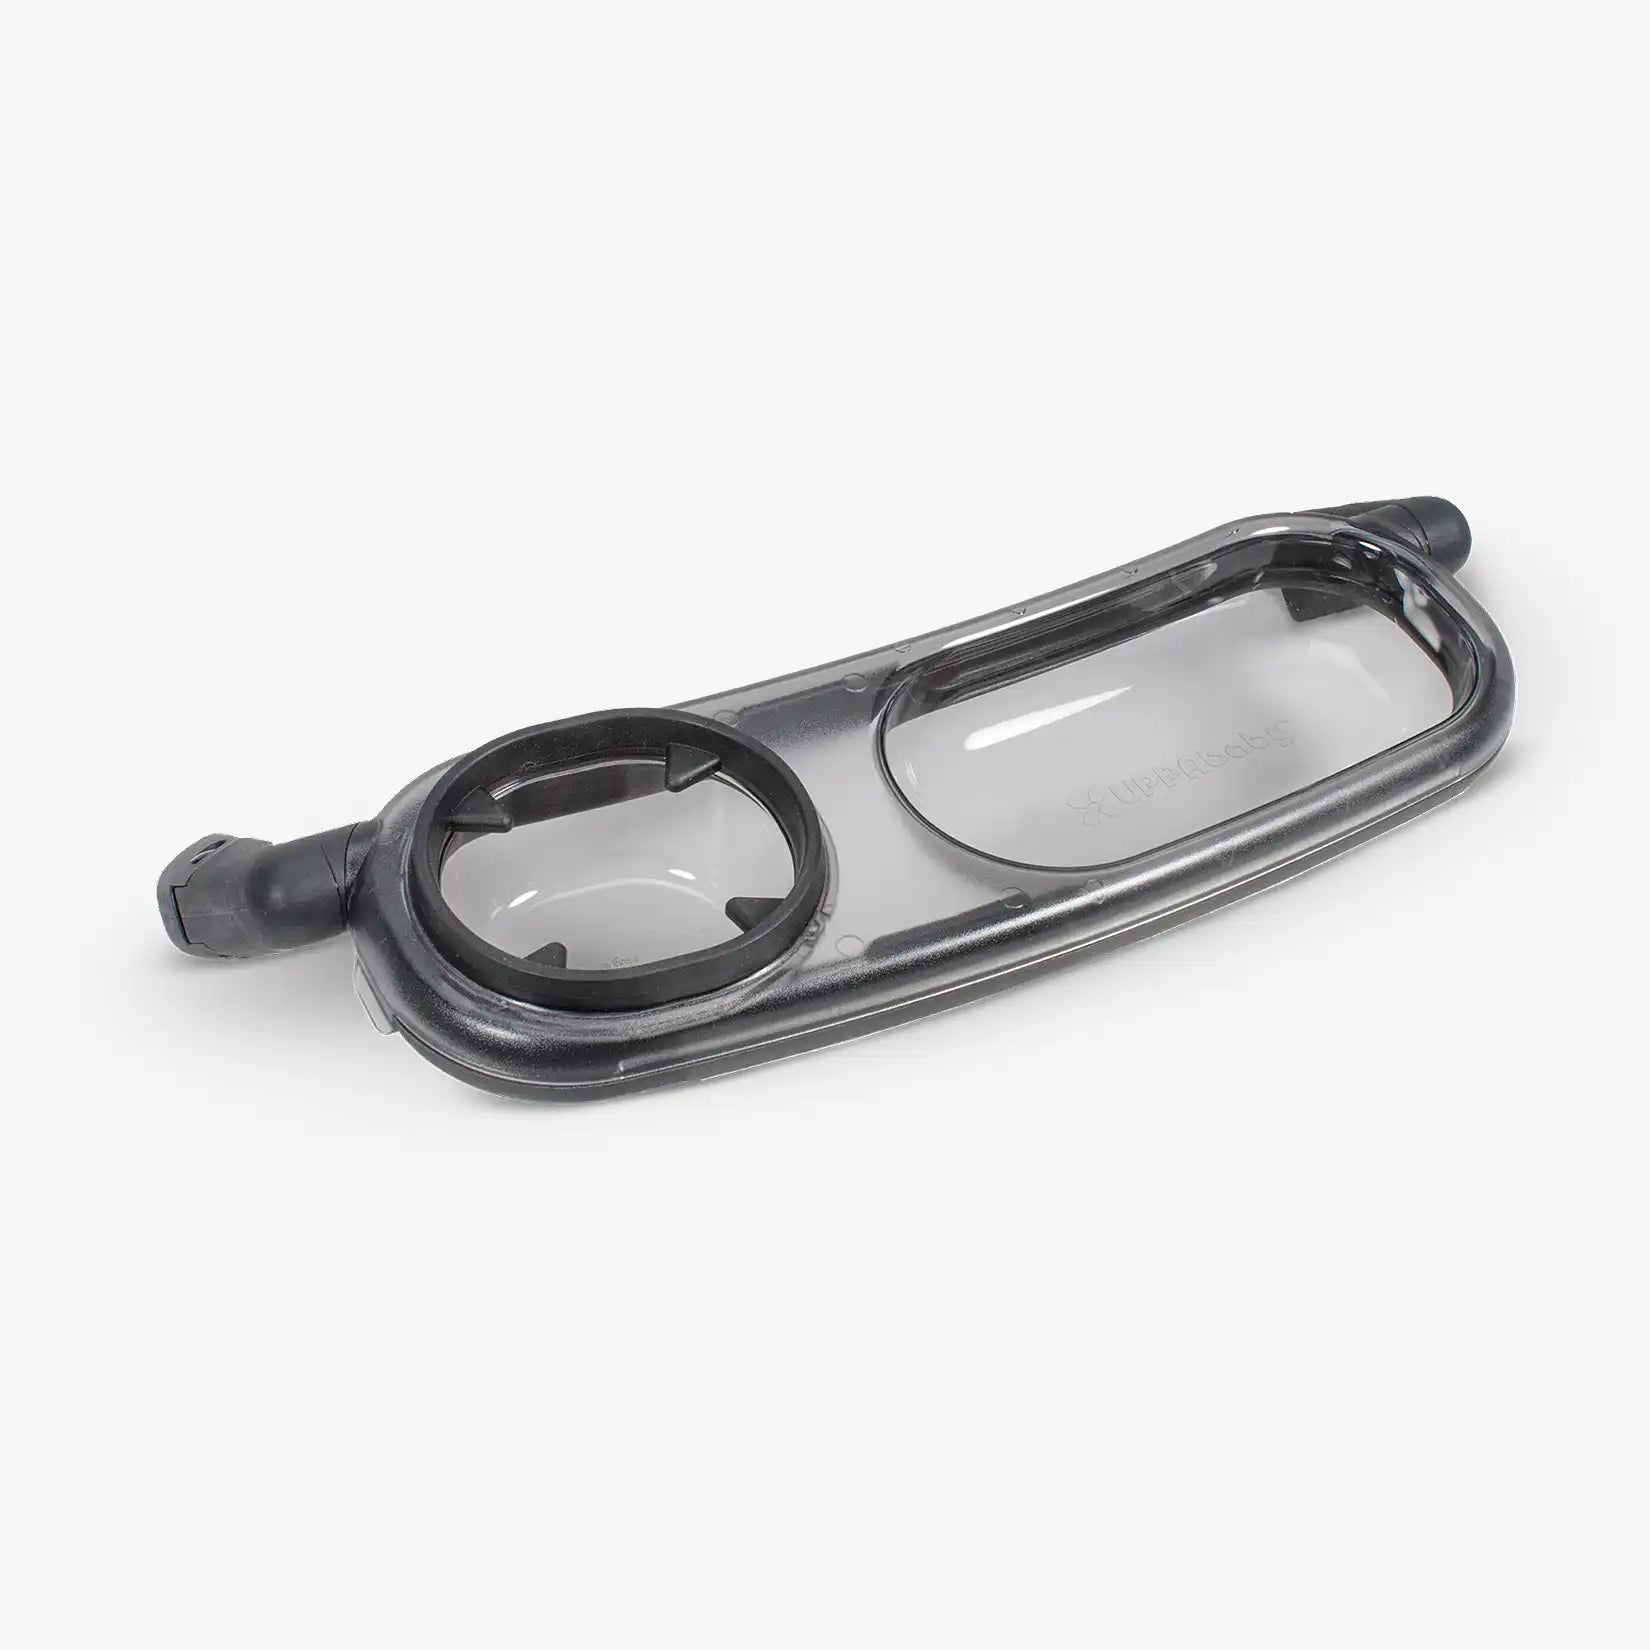 UPPAbaby Snack Tray - ANB Baby -817609011753$20 - $50